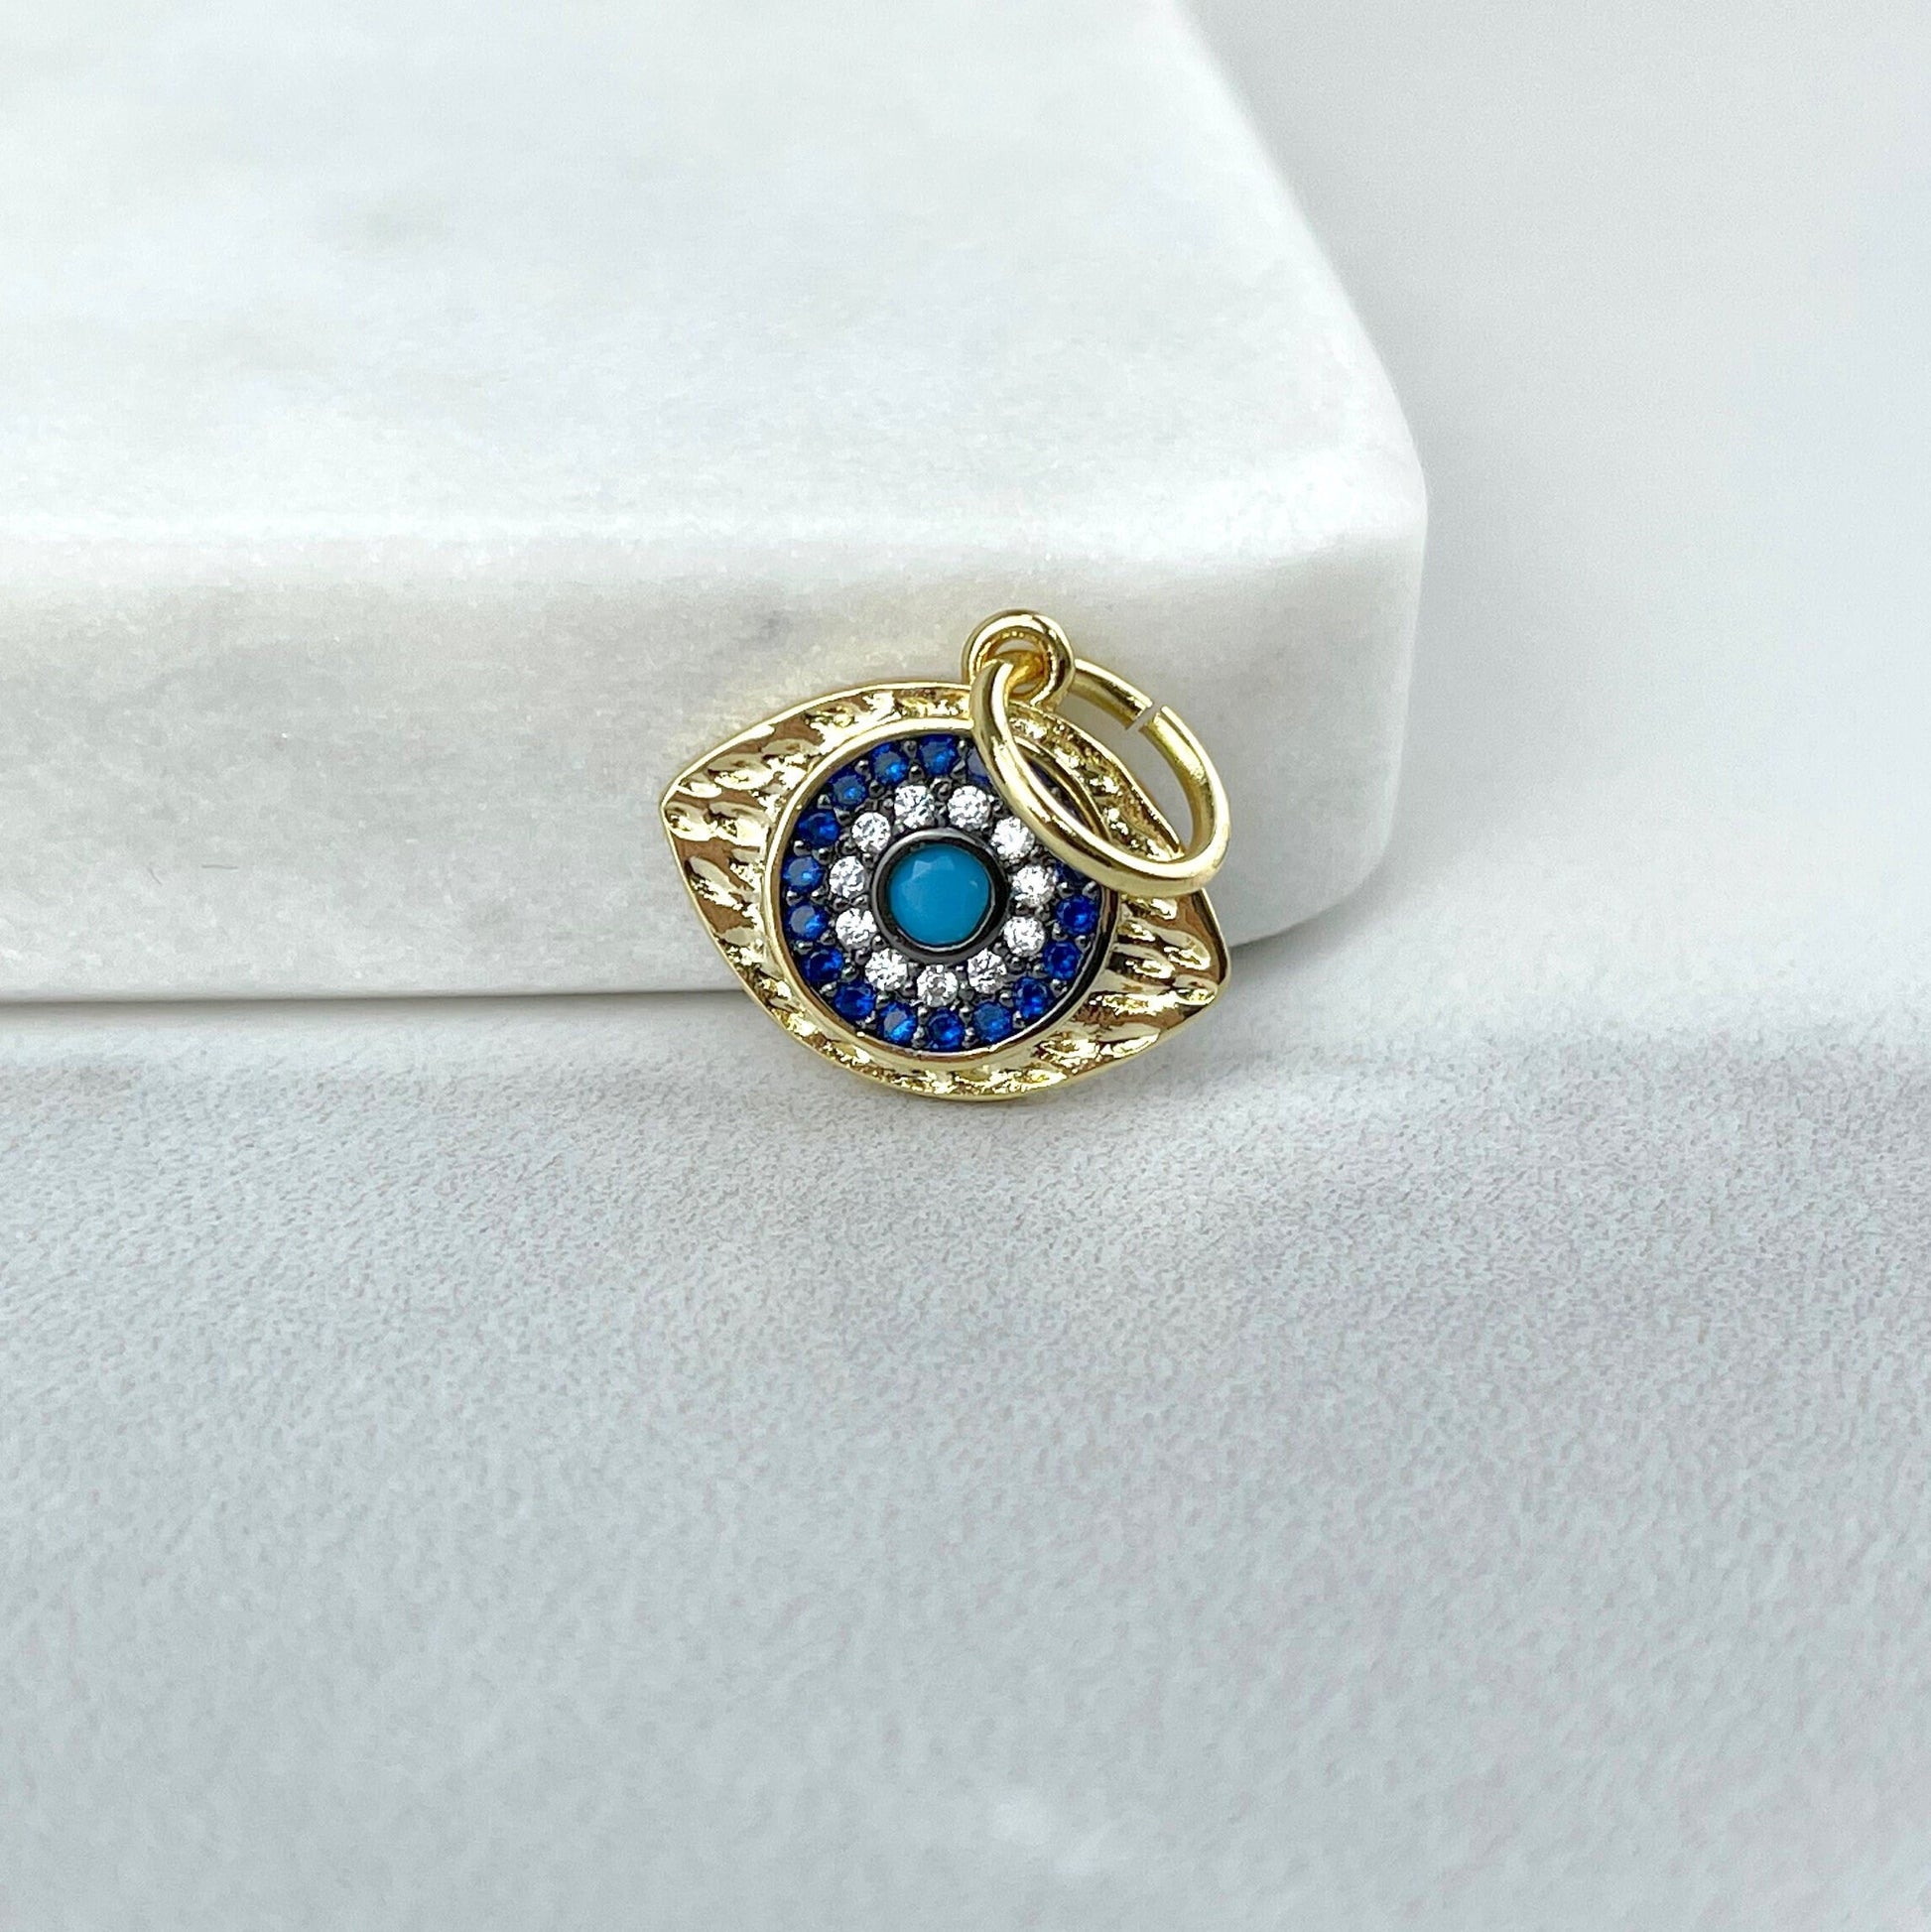 18k Gold Filled Micro Pave Cubic Zirconia Blue Evil Eyes Wholesale Jewelry Making Supplies